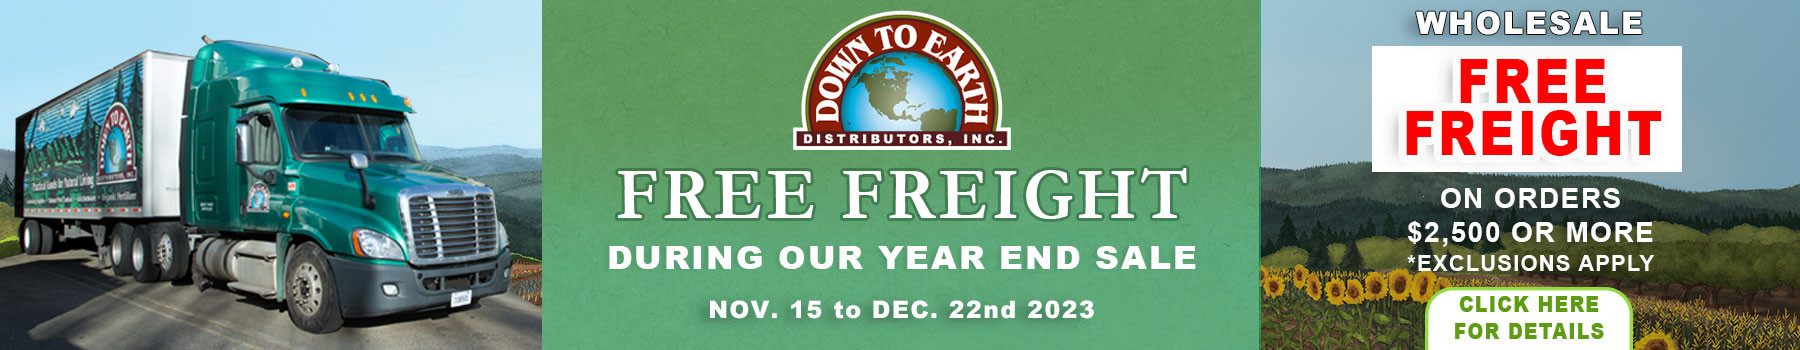 Year End Sale! Free Freight on orders over $ 2500.00 Wholesale